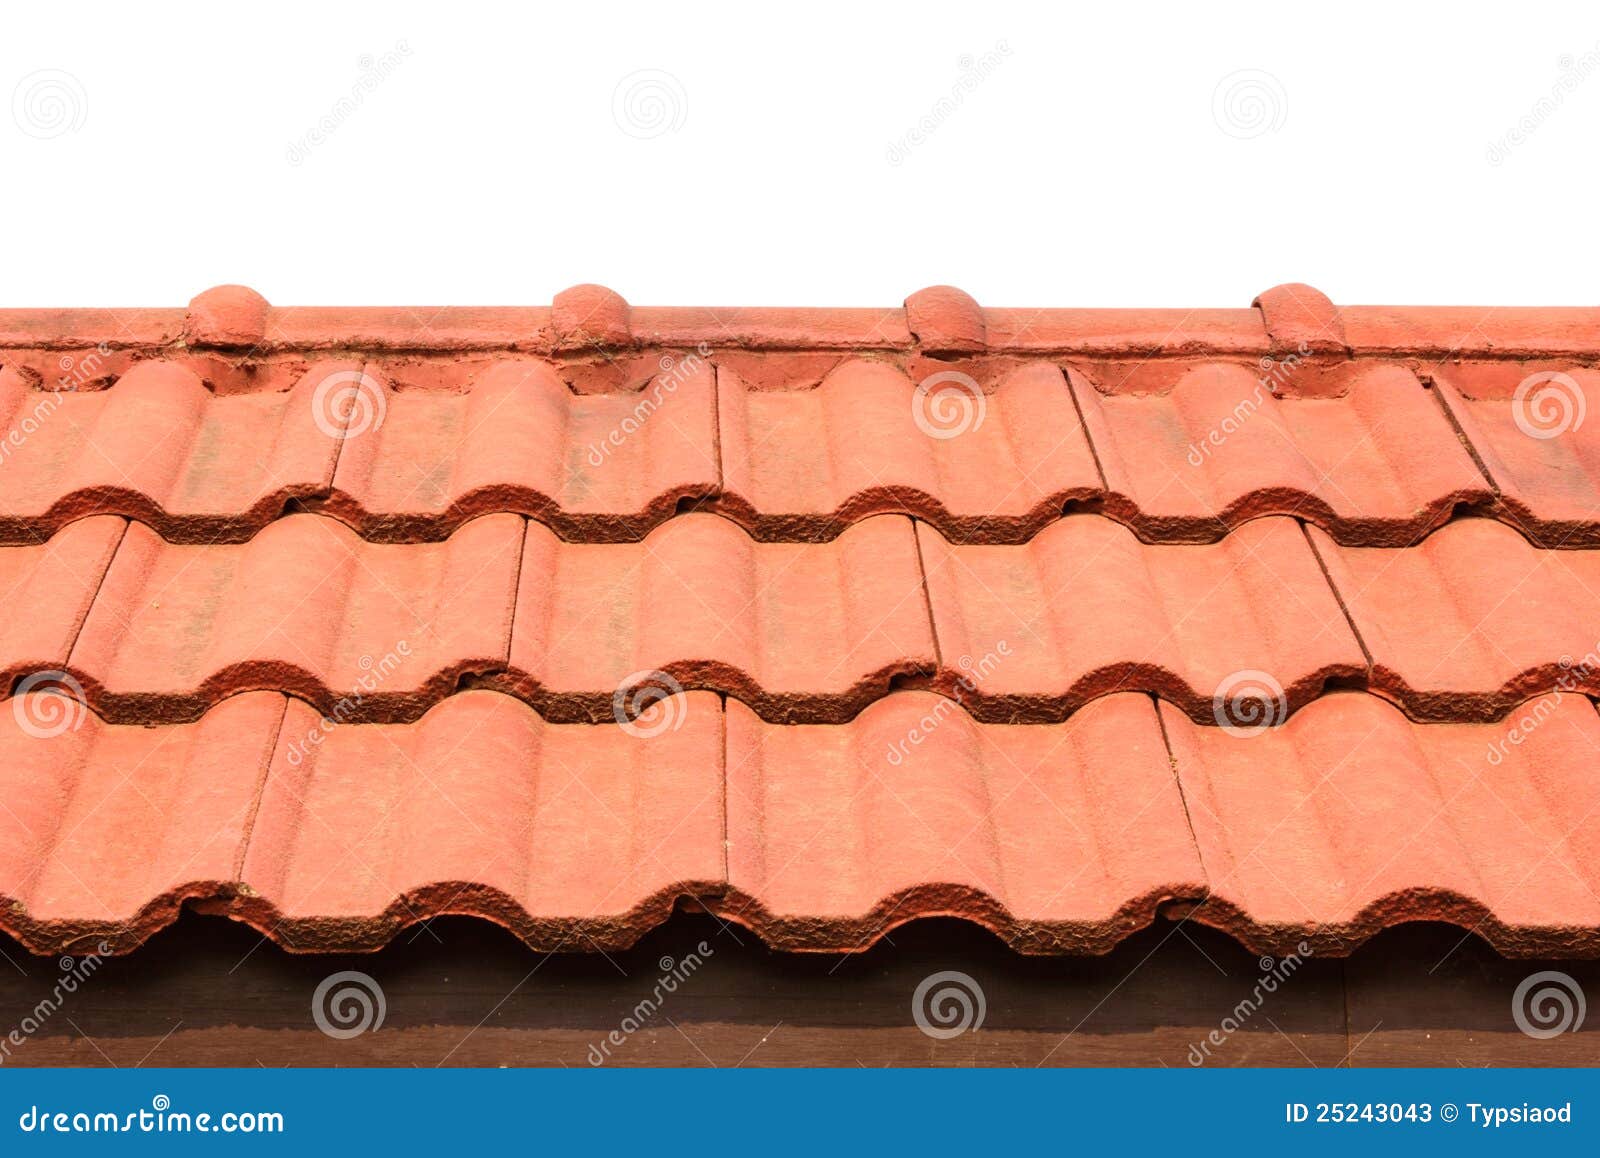 Orange tile roofs stock image. Image of protection, blue - 25243043